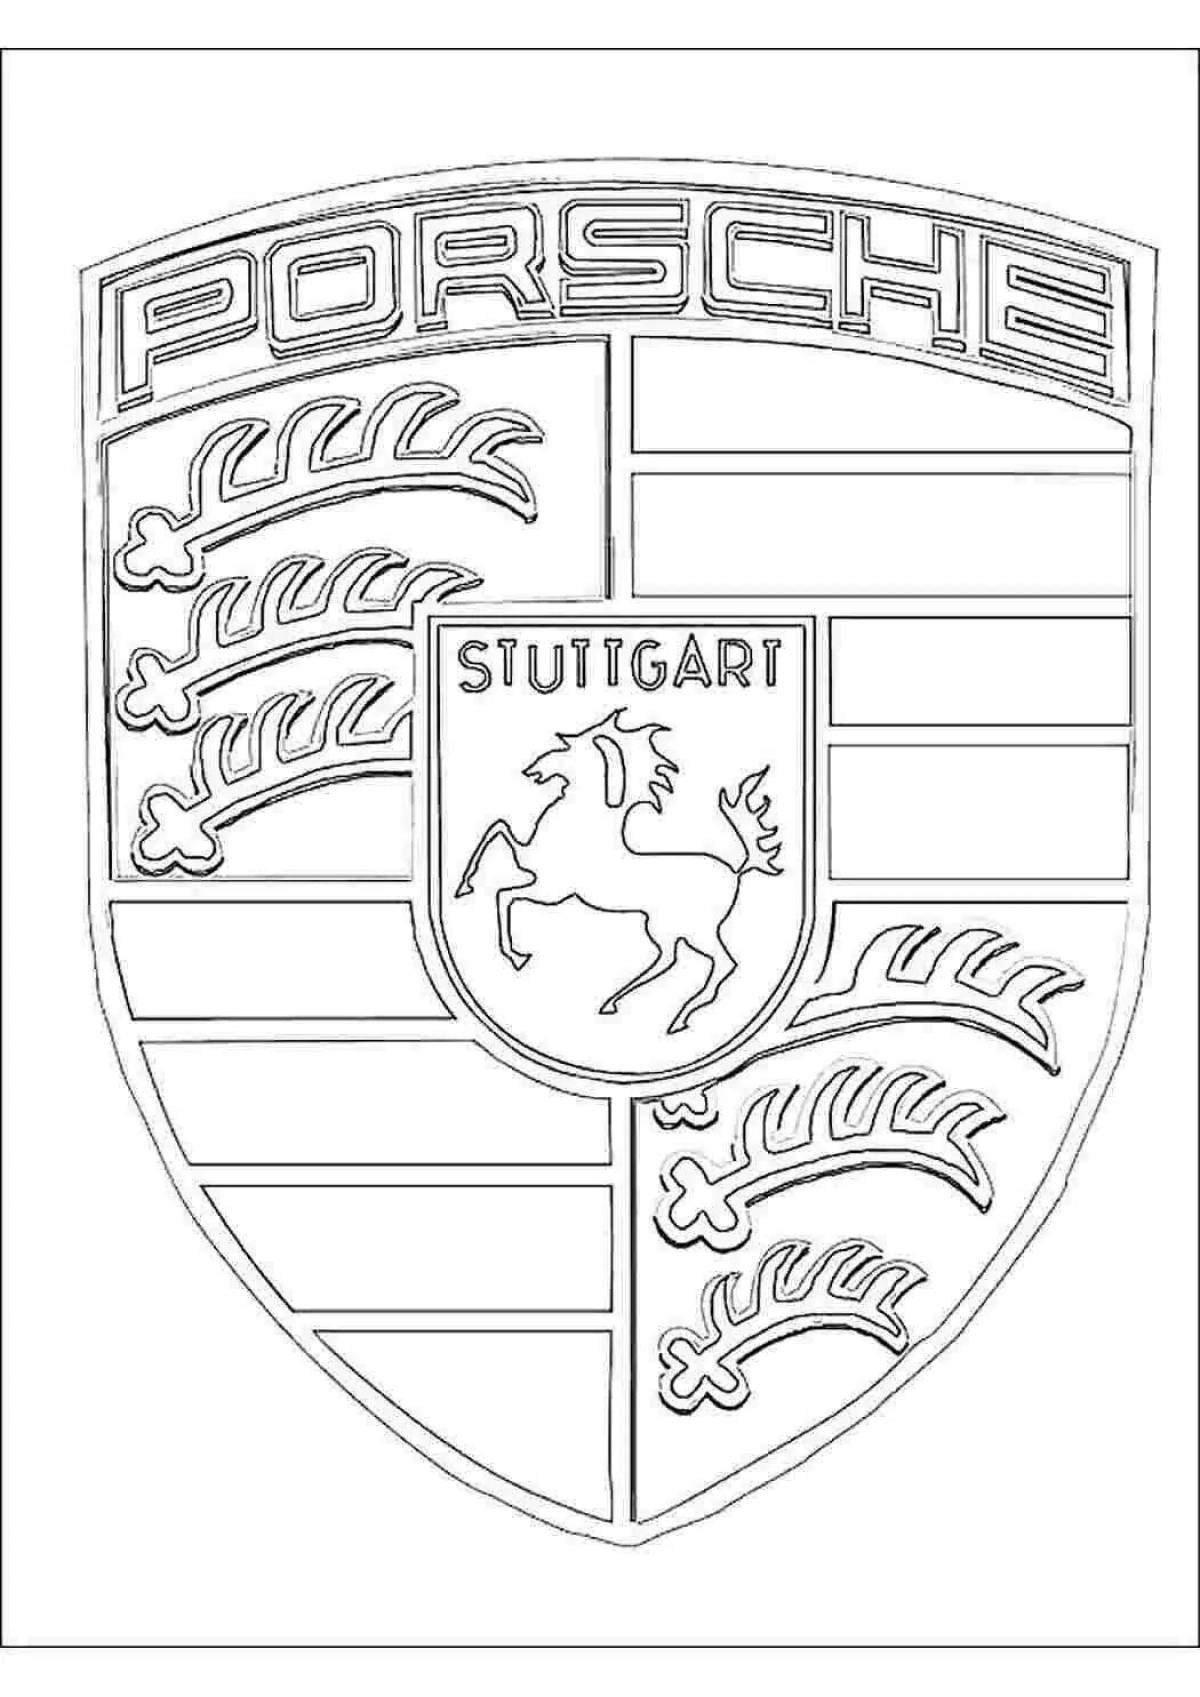 Intriguing car sign coloring page